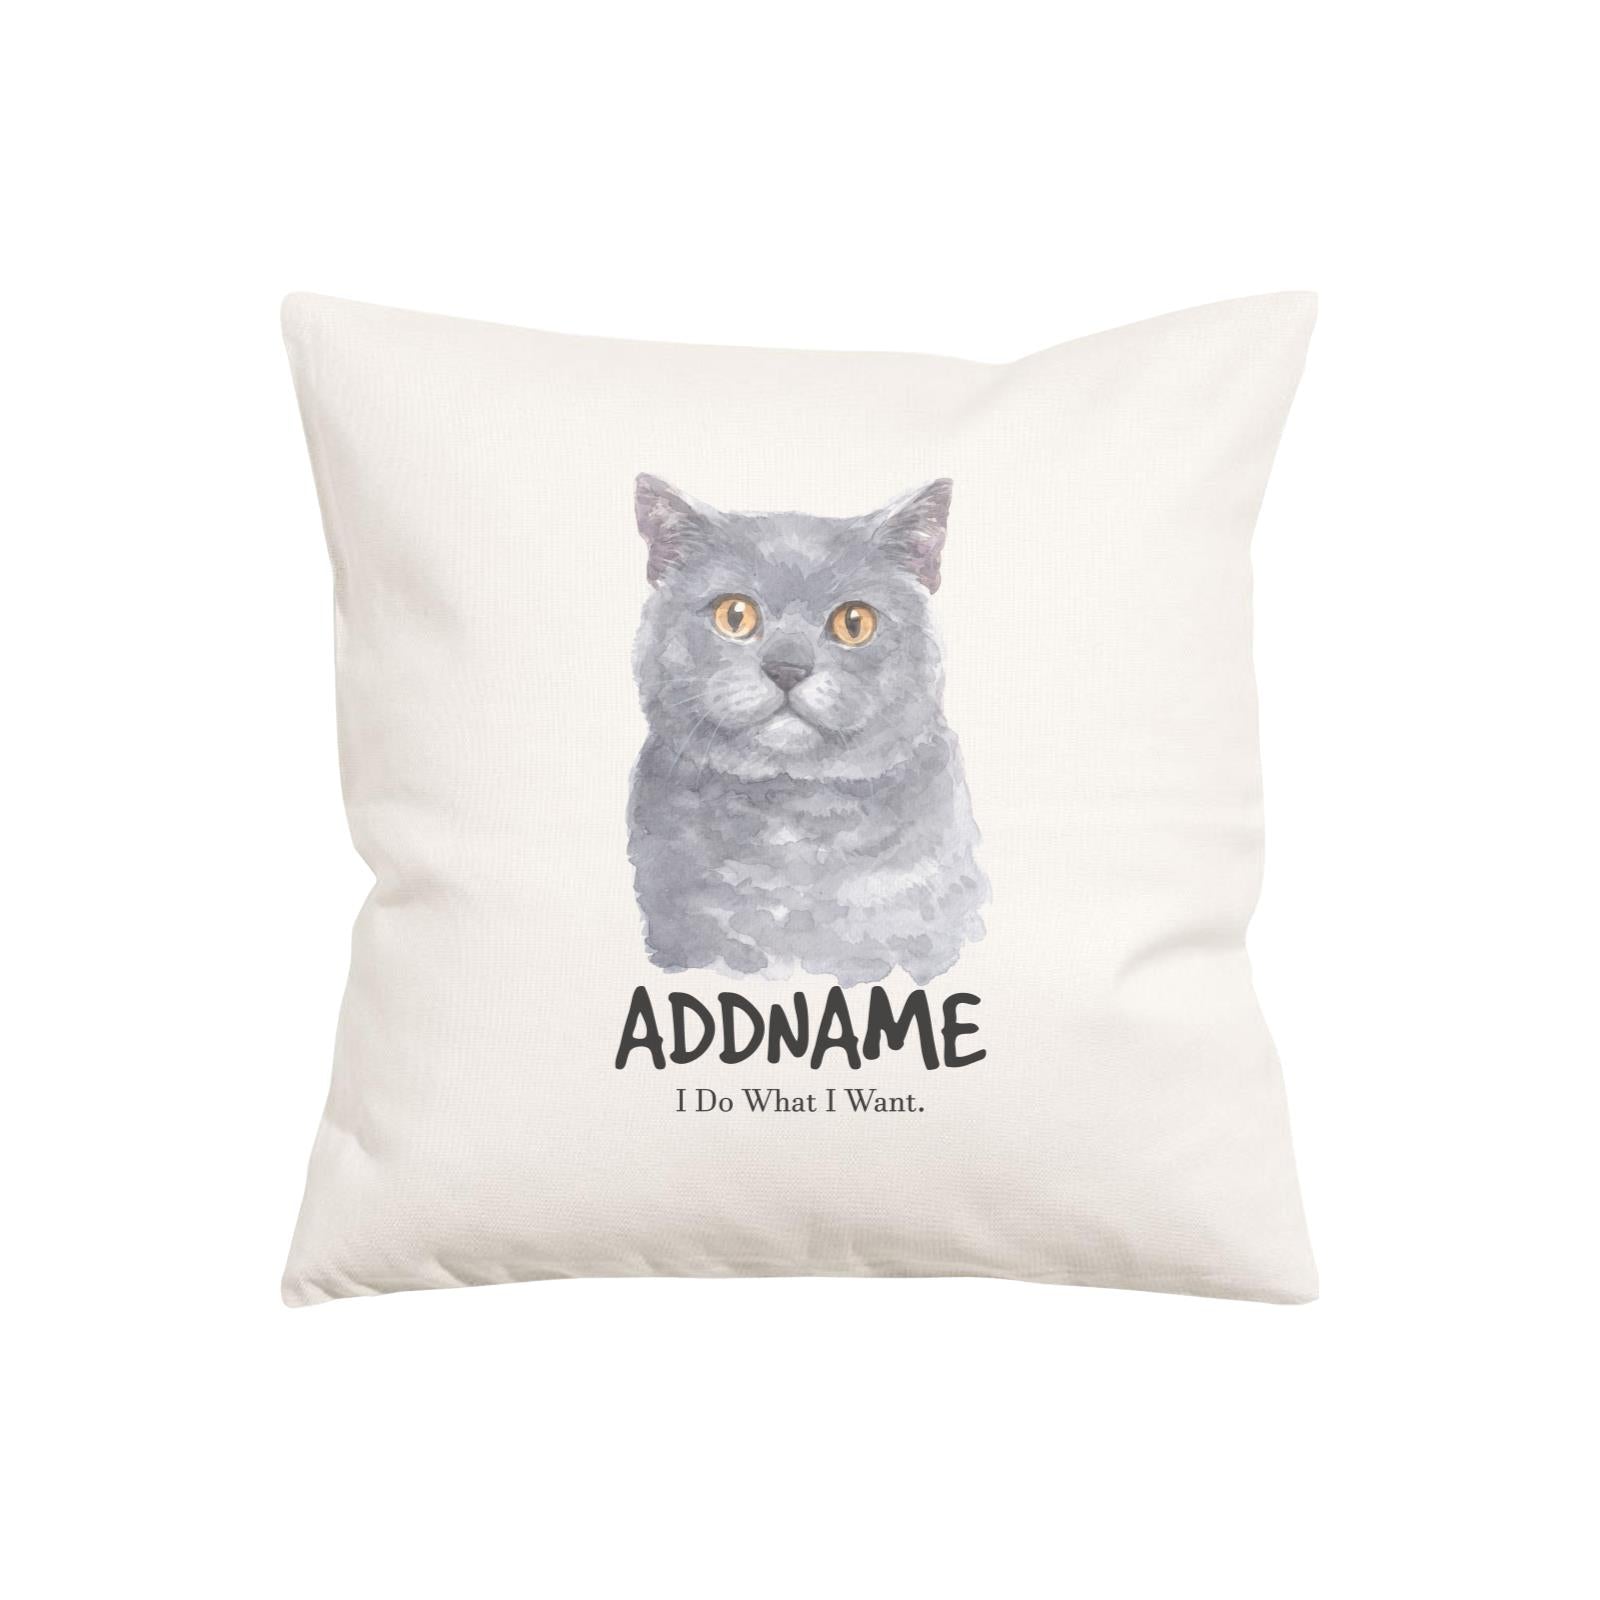 Watercolor Cat Series British Shorthair I Do What I Want Addname Pillow Cushion